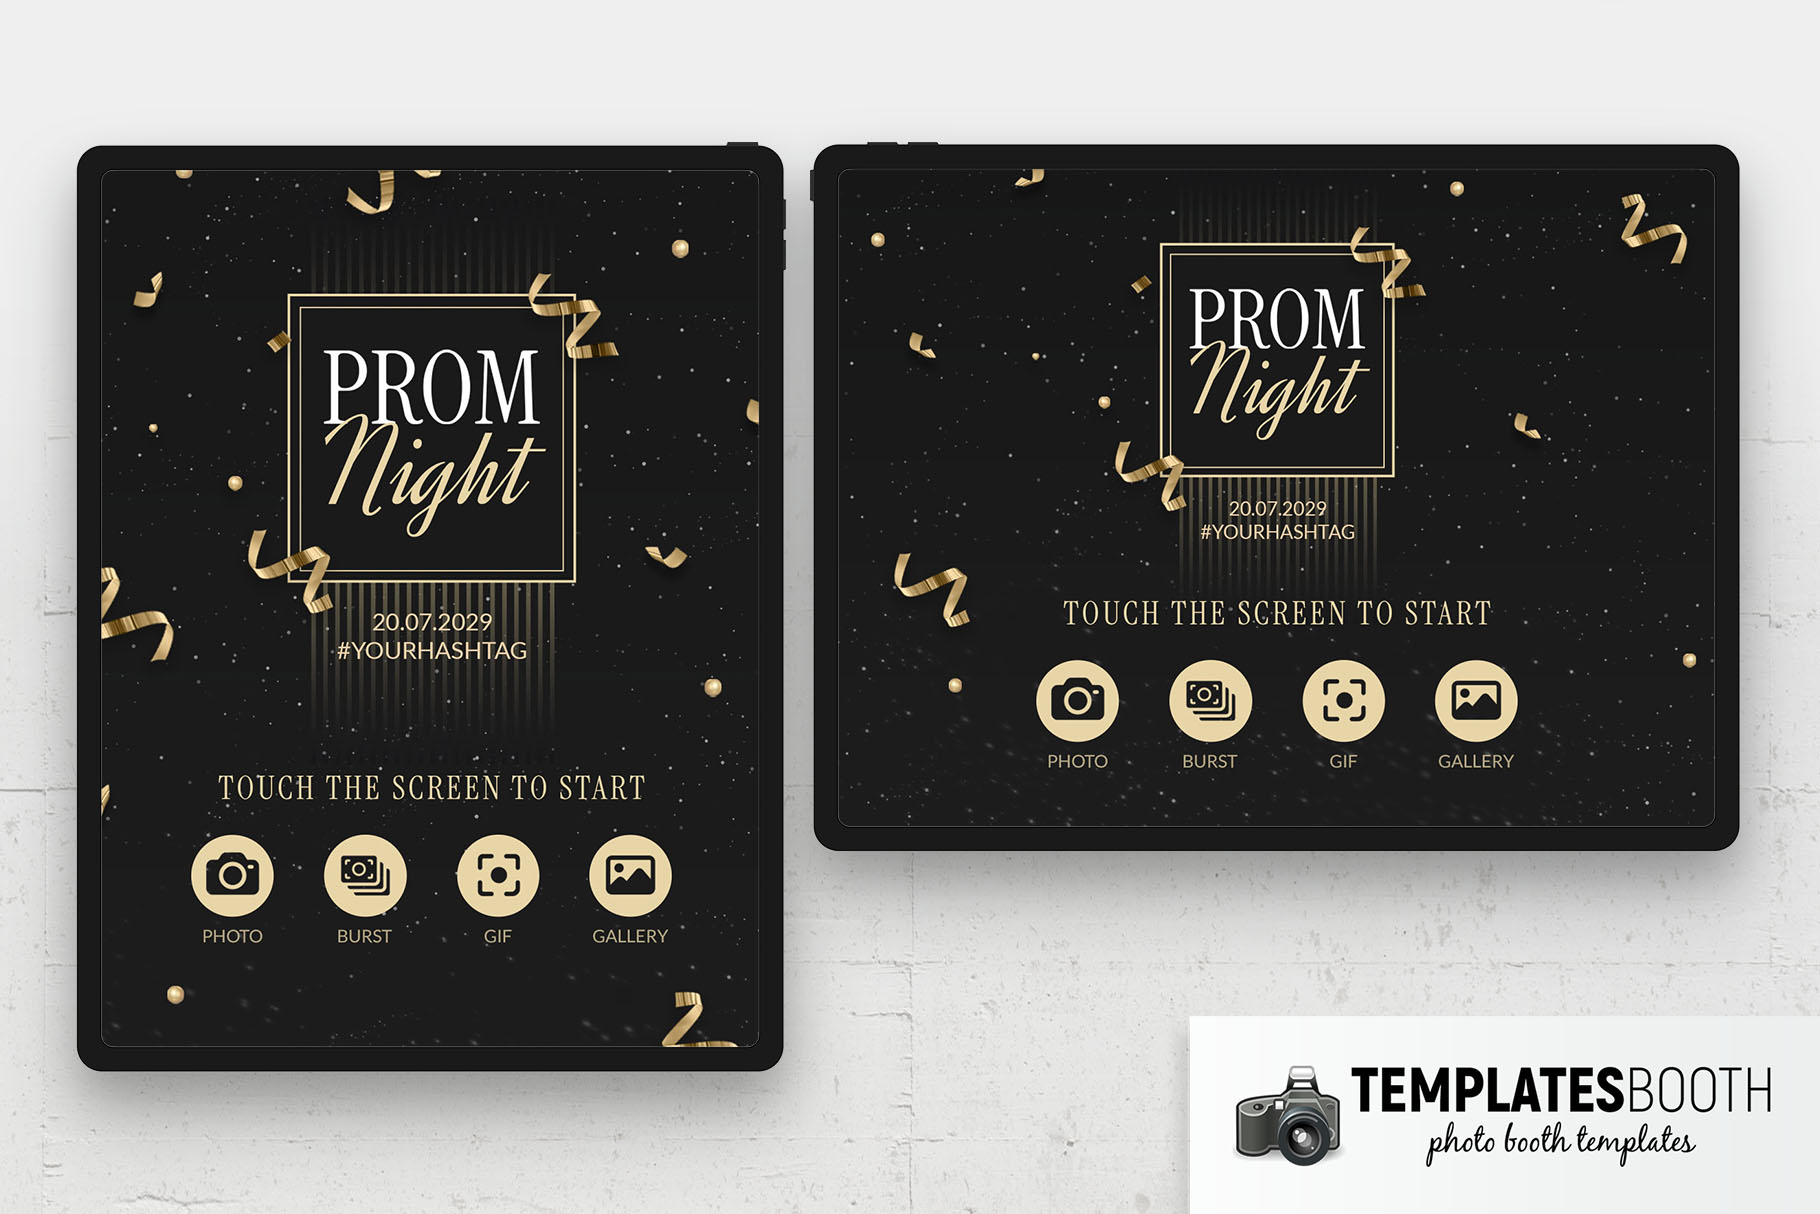 Prom Night Photo Booth Welcome Screen